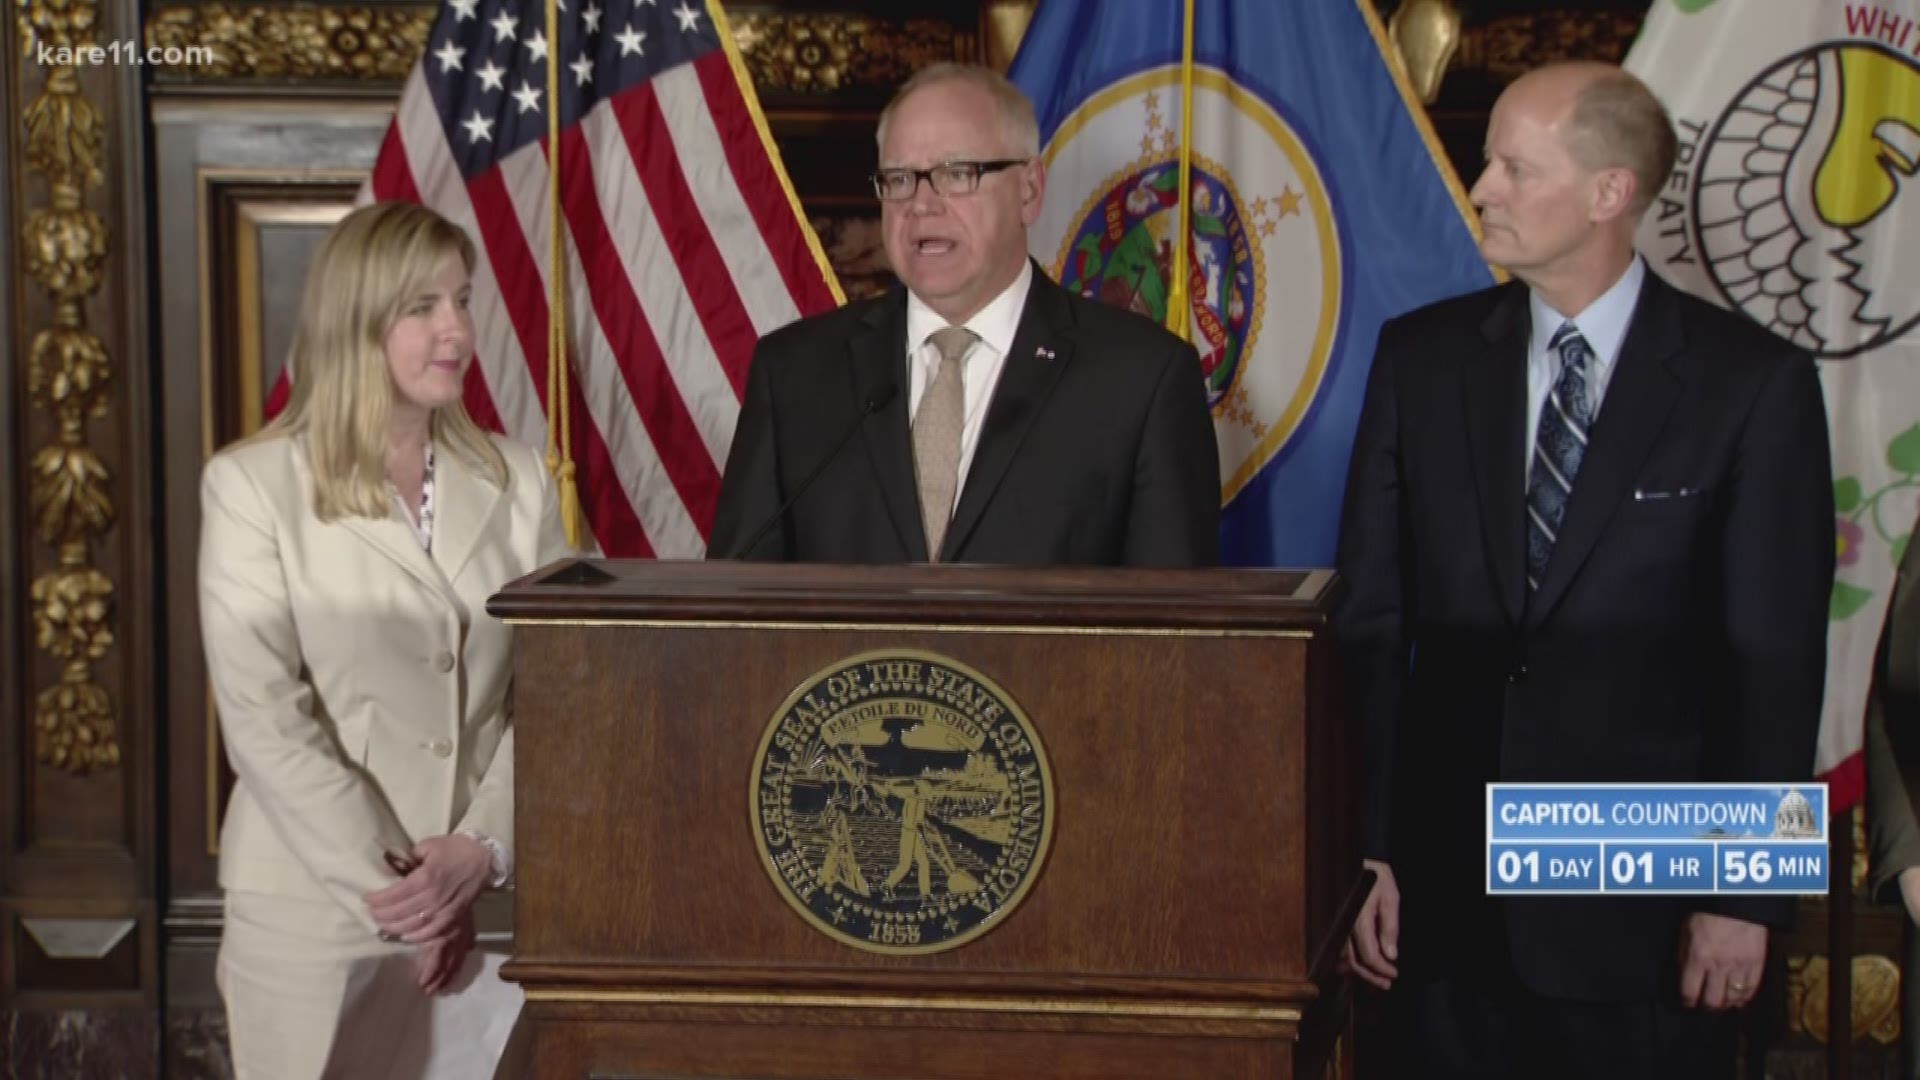 Minnesota Gov. Tim Walz and top legislative leaders have reached a bipartisan budget agreement that drops the governor's proposed gasoline tax increase but gives middle-class Minnesotans an income tax cut and preserves most of an expiring tax that funds health care.